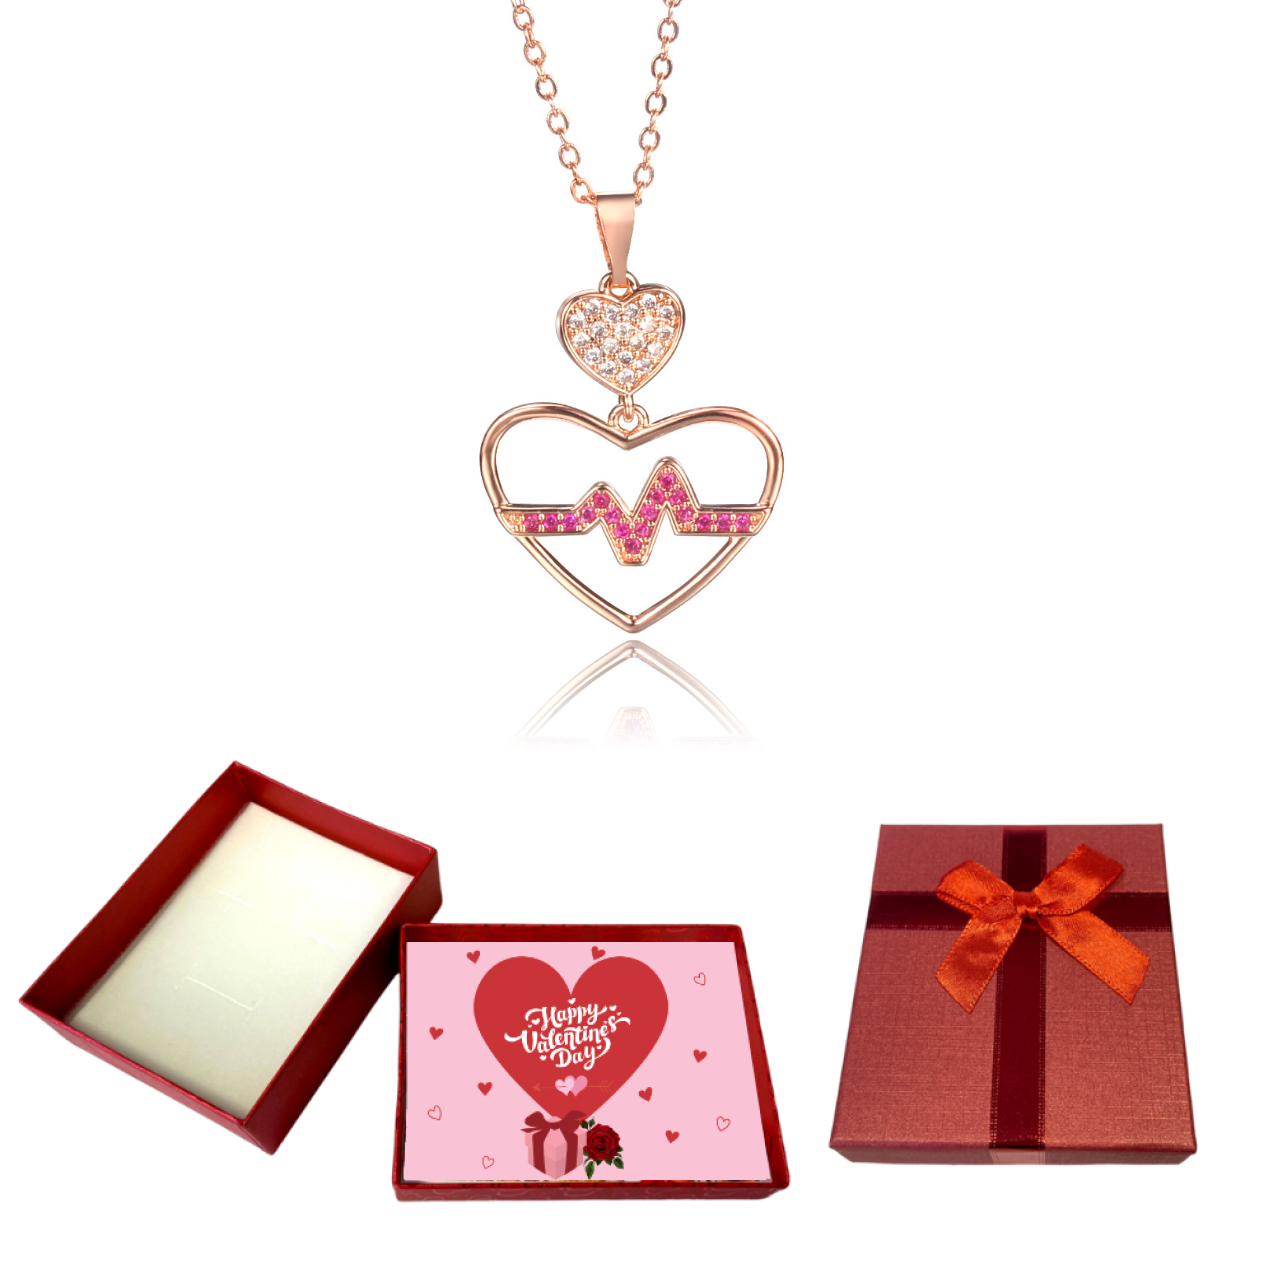 10 pcs - Crystal Filled Heartbeat Pendant Crystal Necklace with Valentines Gift Box|GCC092-Random-Valentine Box|UK SELLER